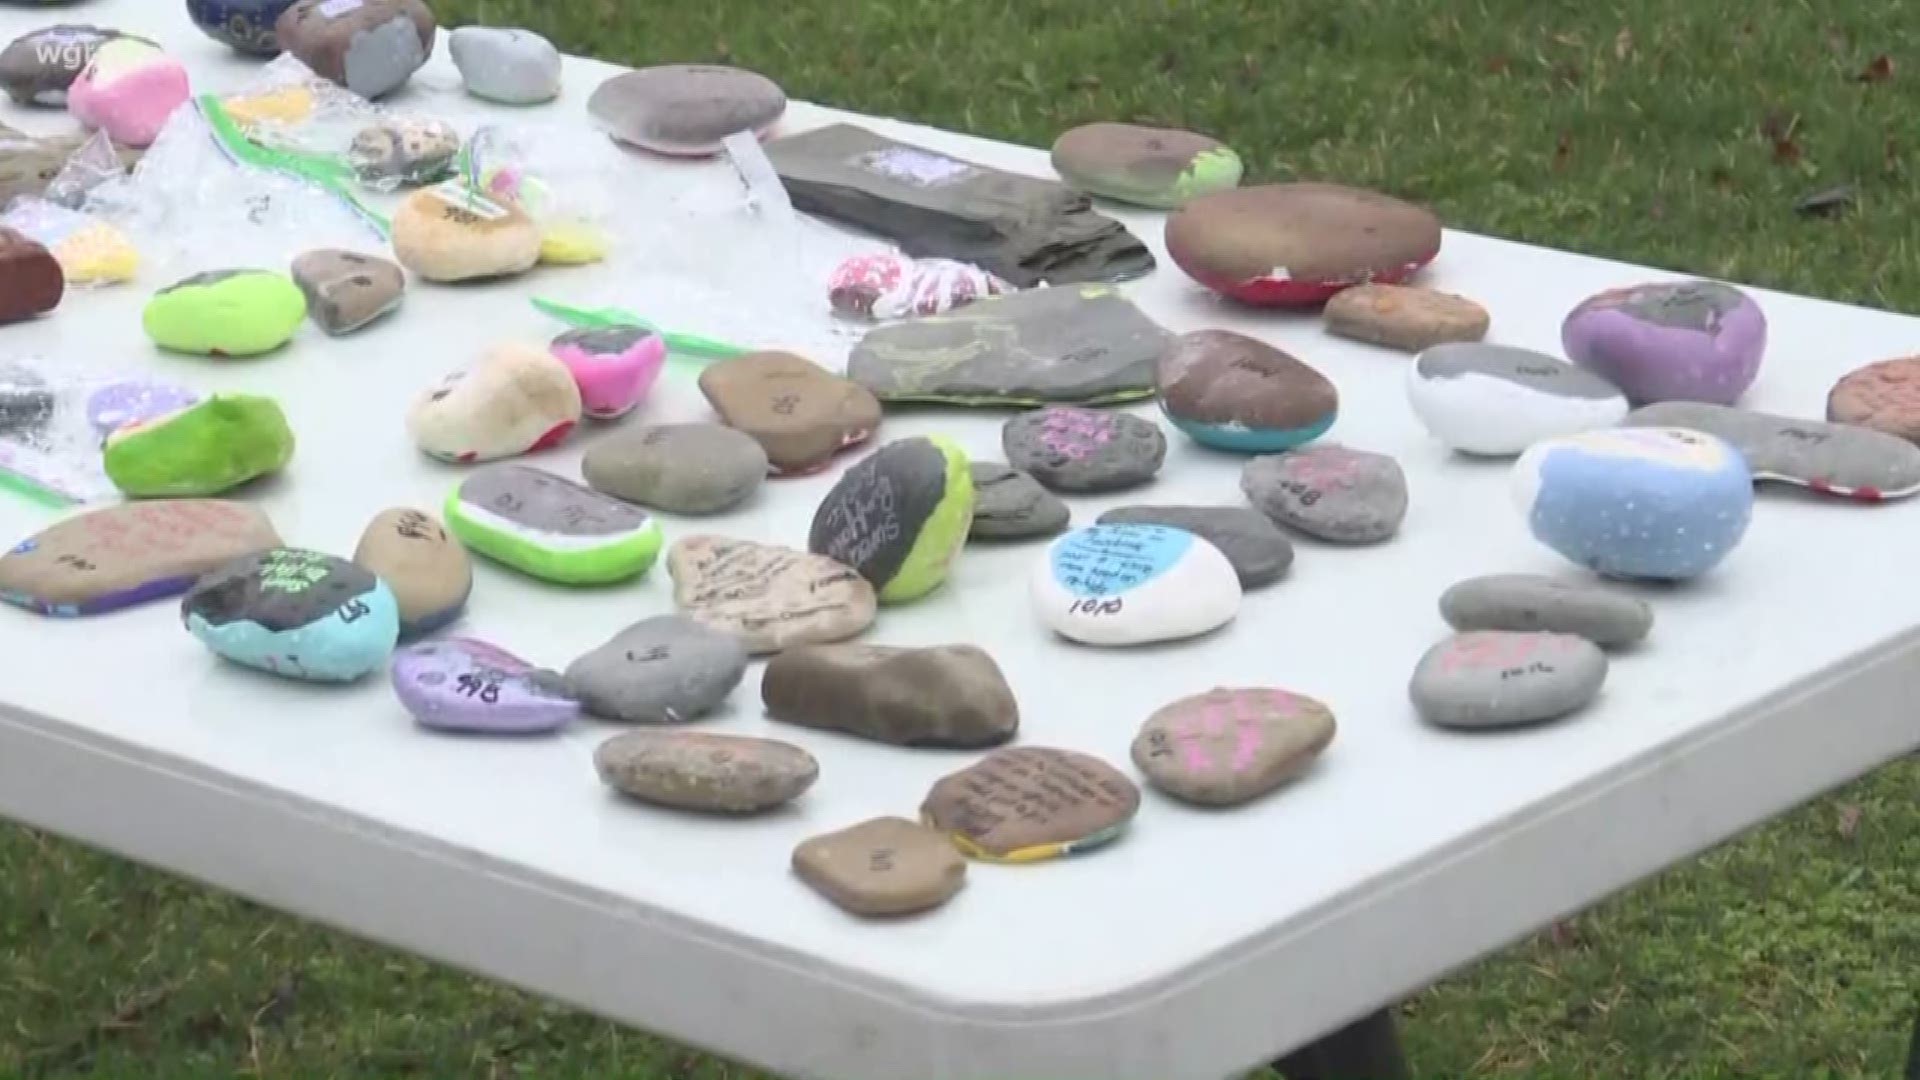 A charity egg hunt put on by Sweet Buffalo Rocks happened day before Easter.